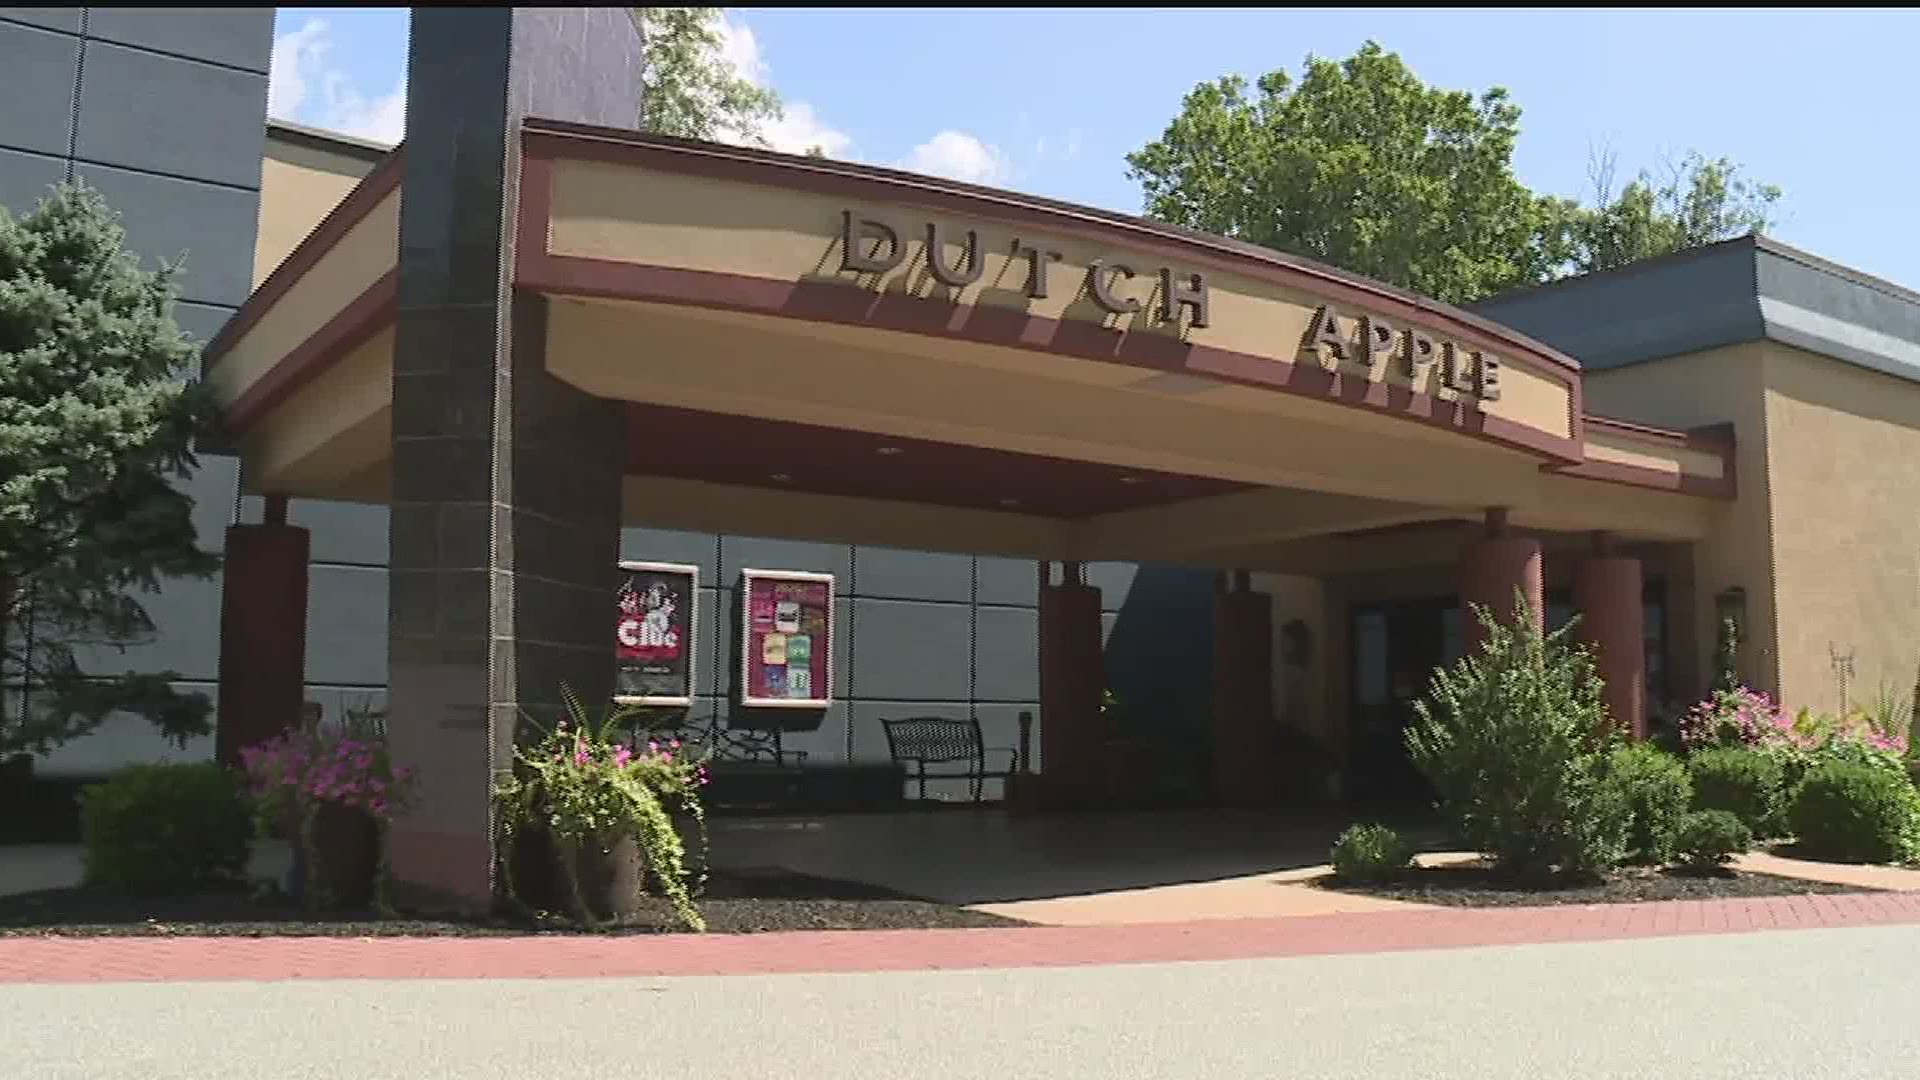 Hoping third time's the charm, Dutch Apple Dinner Theatre opens August 7th | fox43.com